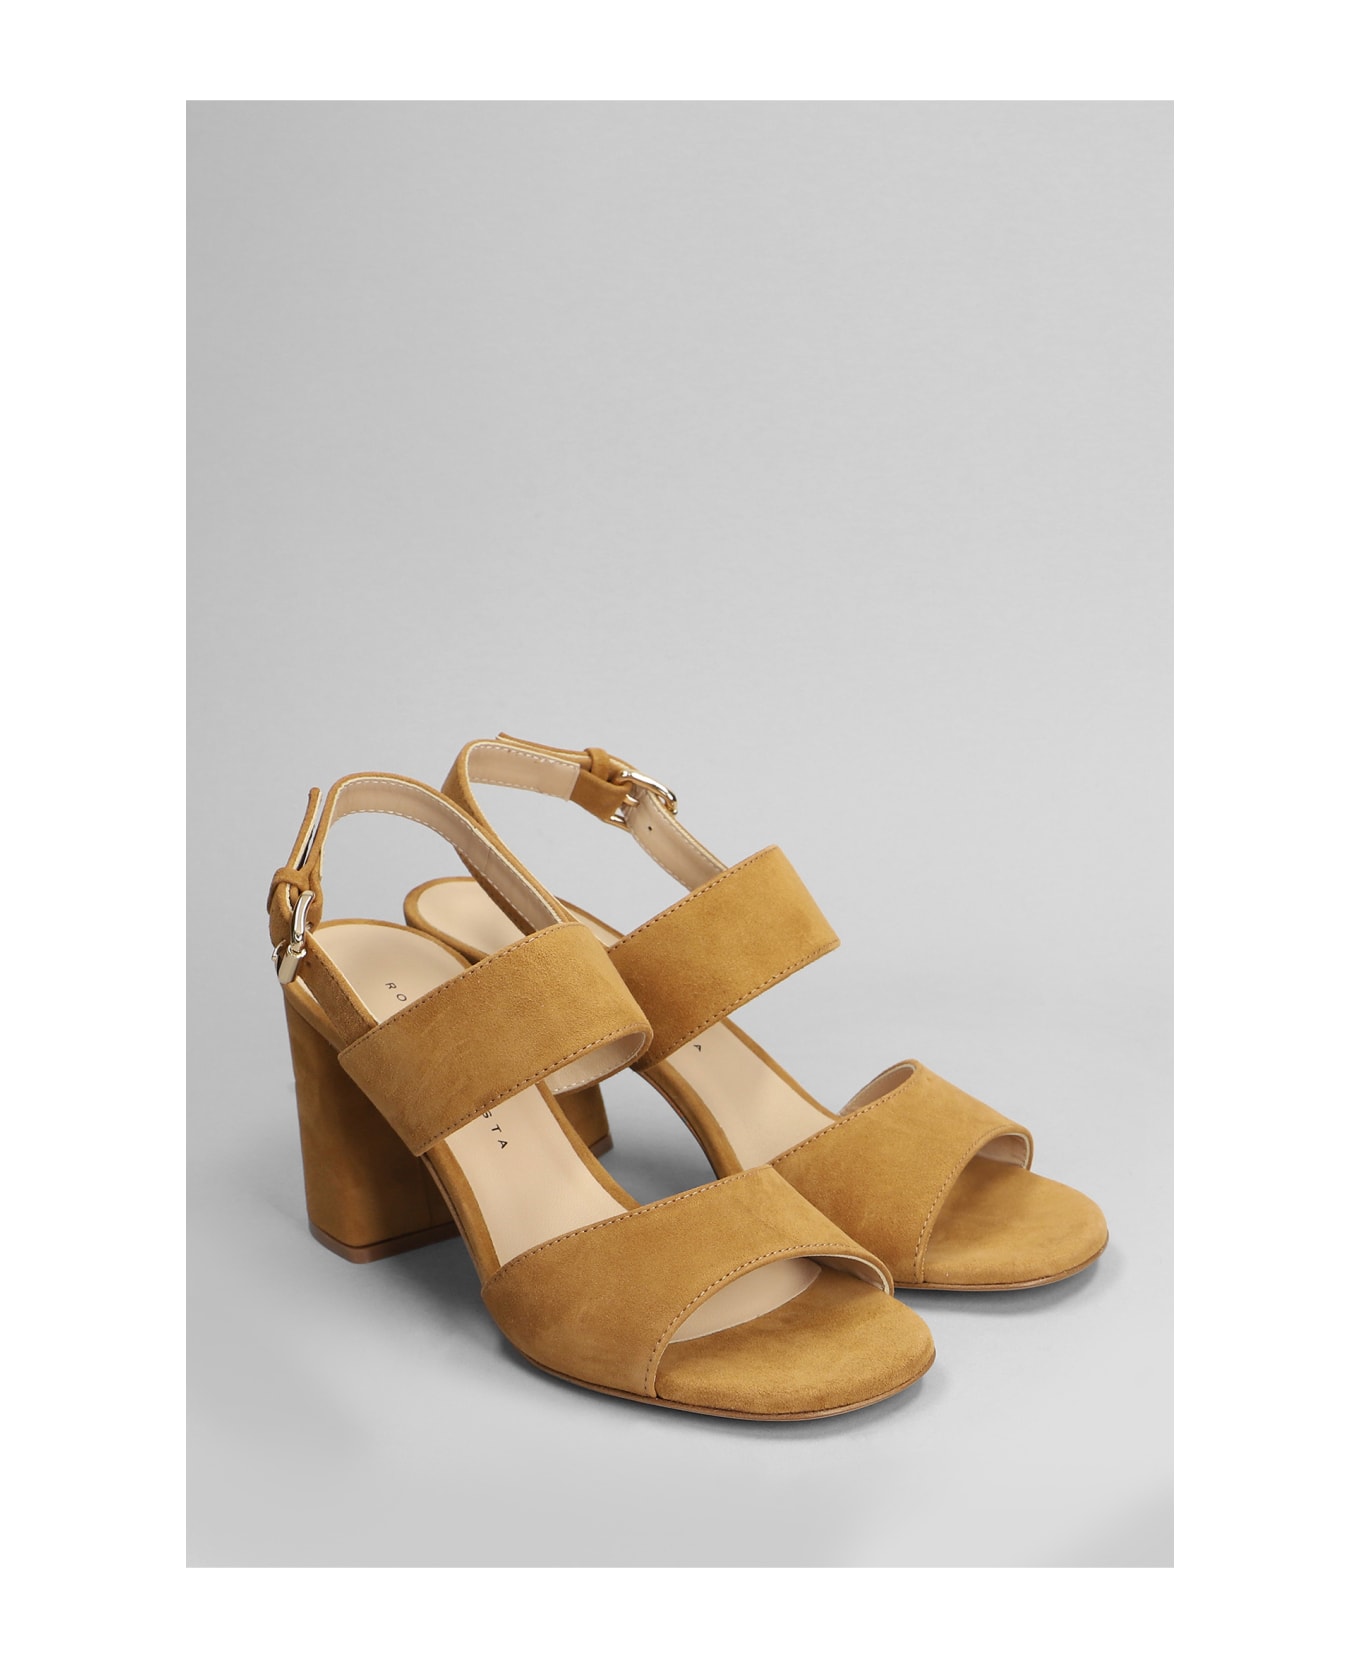 Roberto Festa Bucaneve Sandals In Leather Color Suede - leather color サンダル